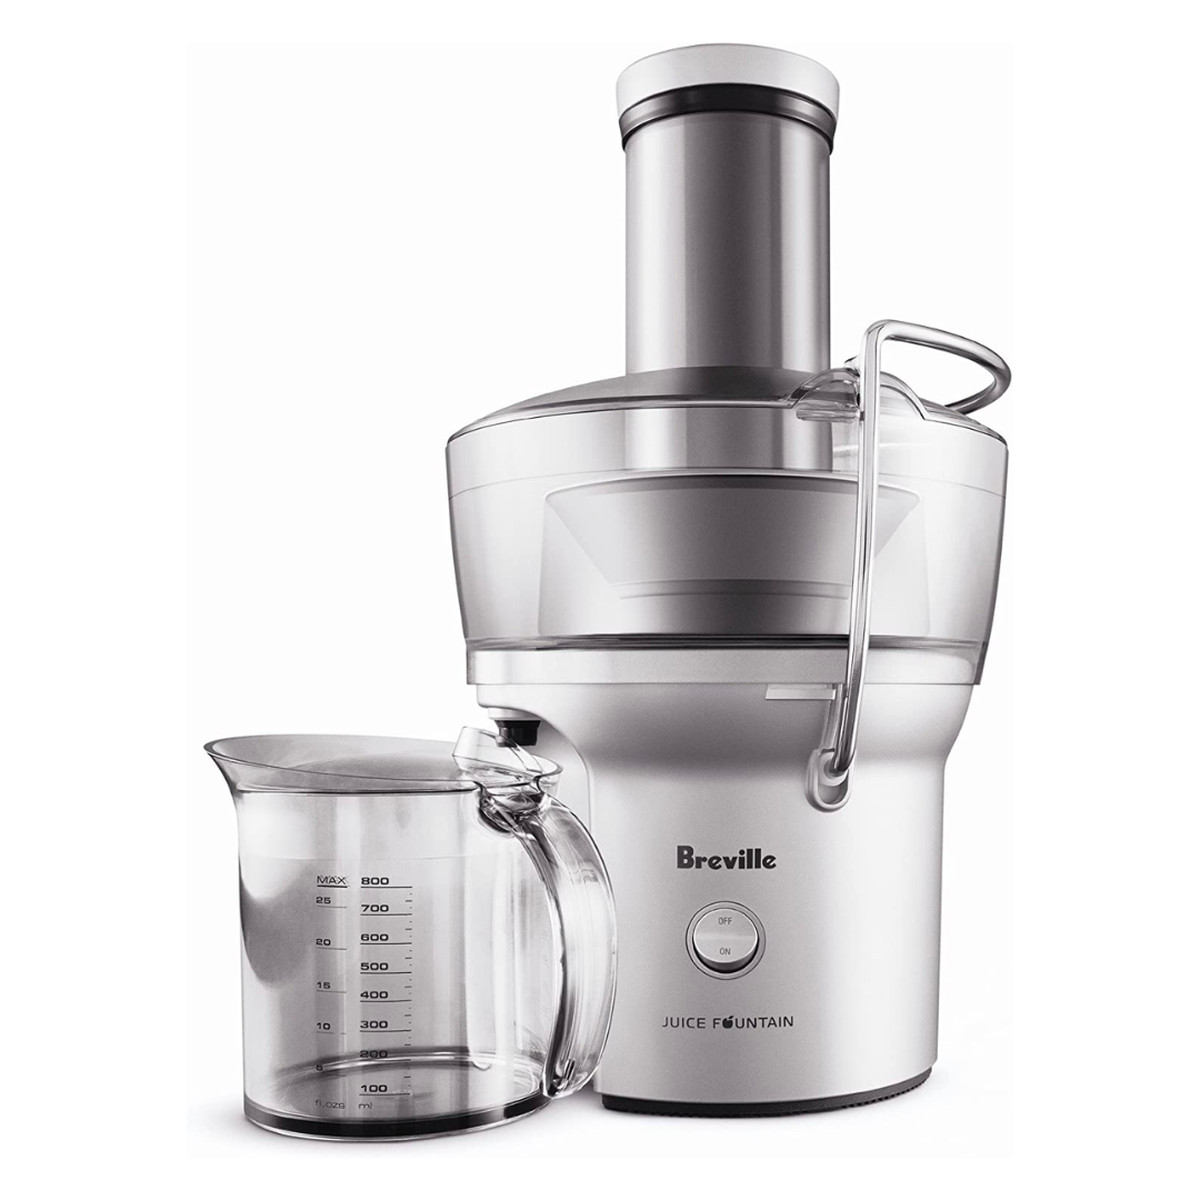 Silver Breville juicer with acessories